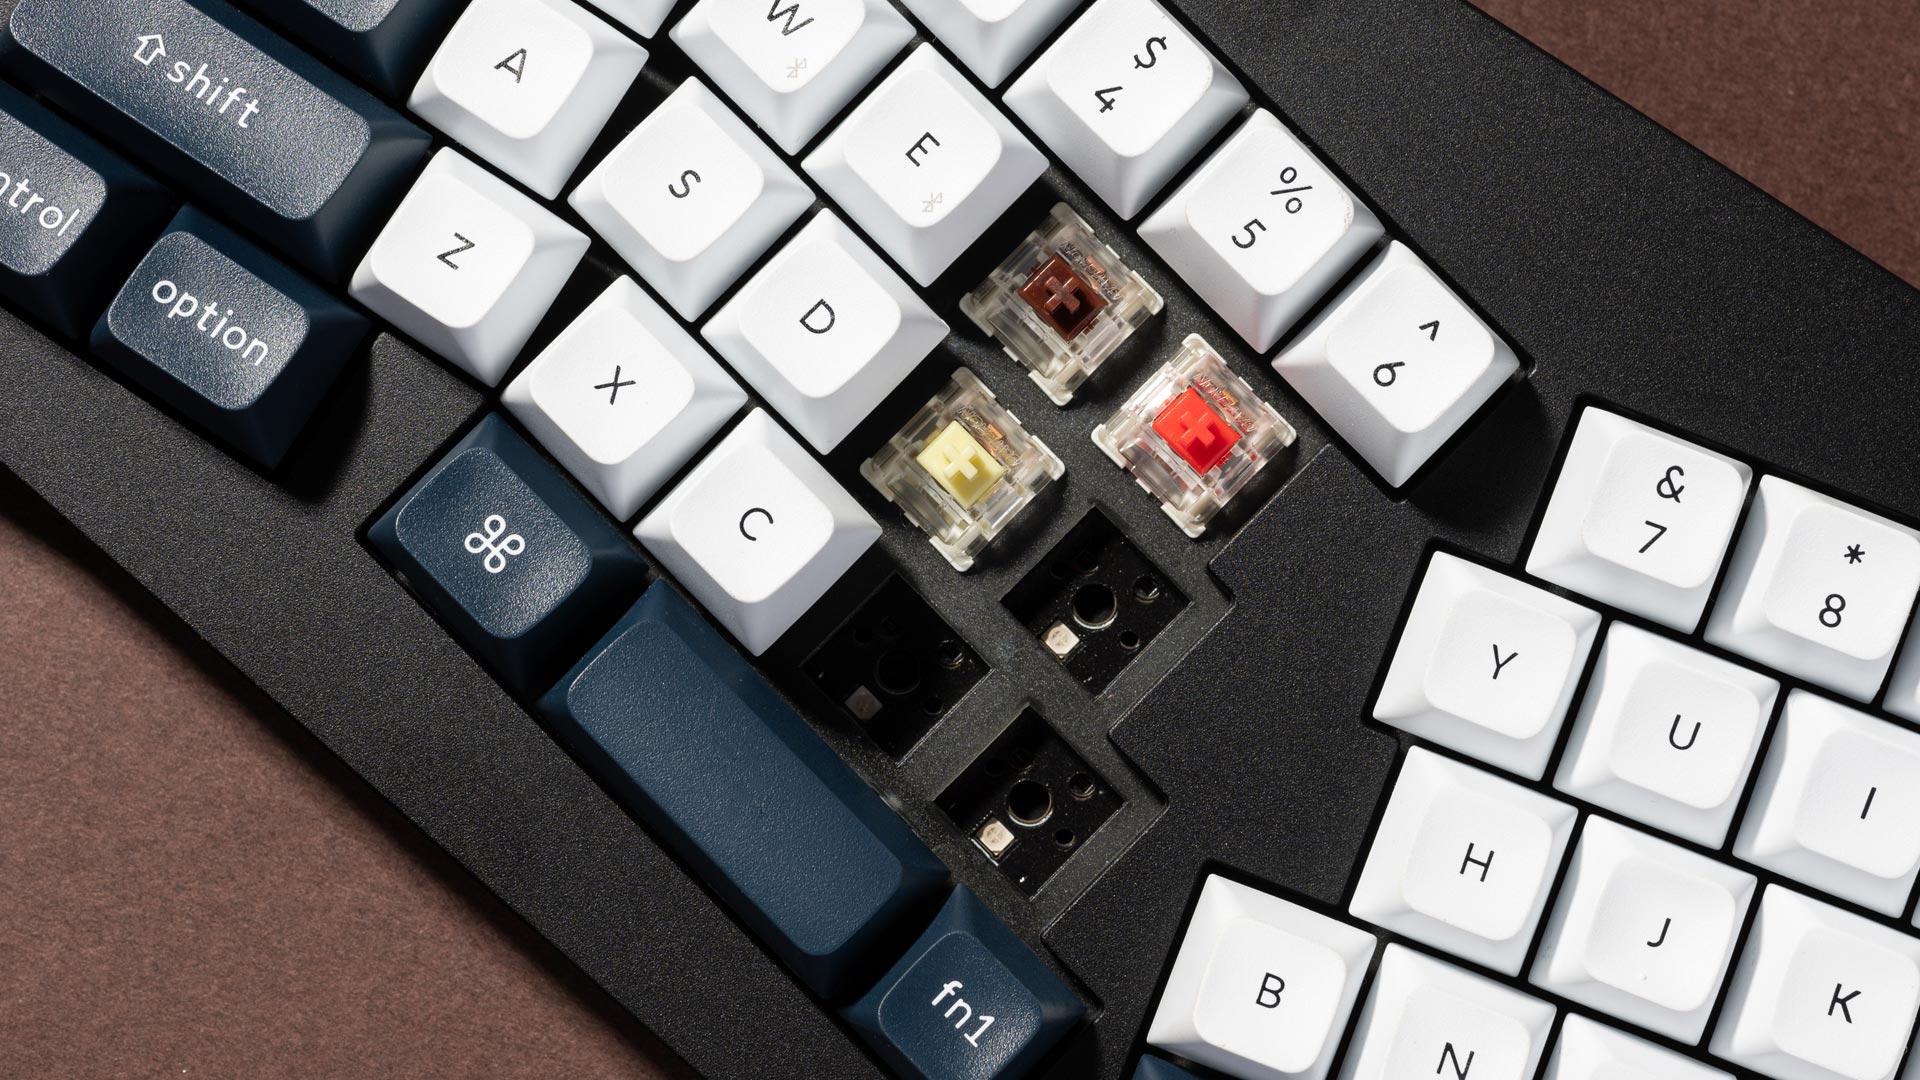 Keychron Q8 Max Hot-Swappable